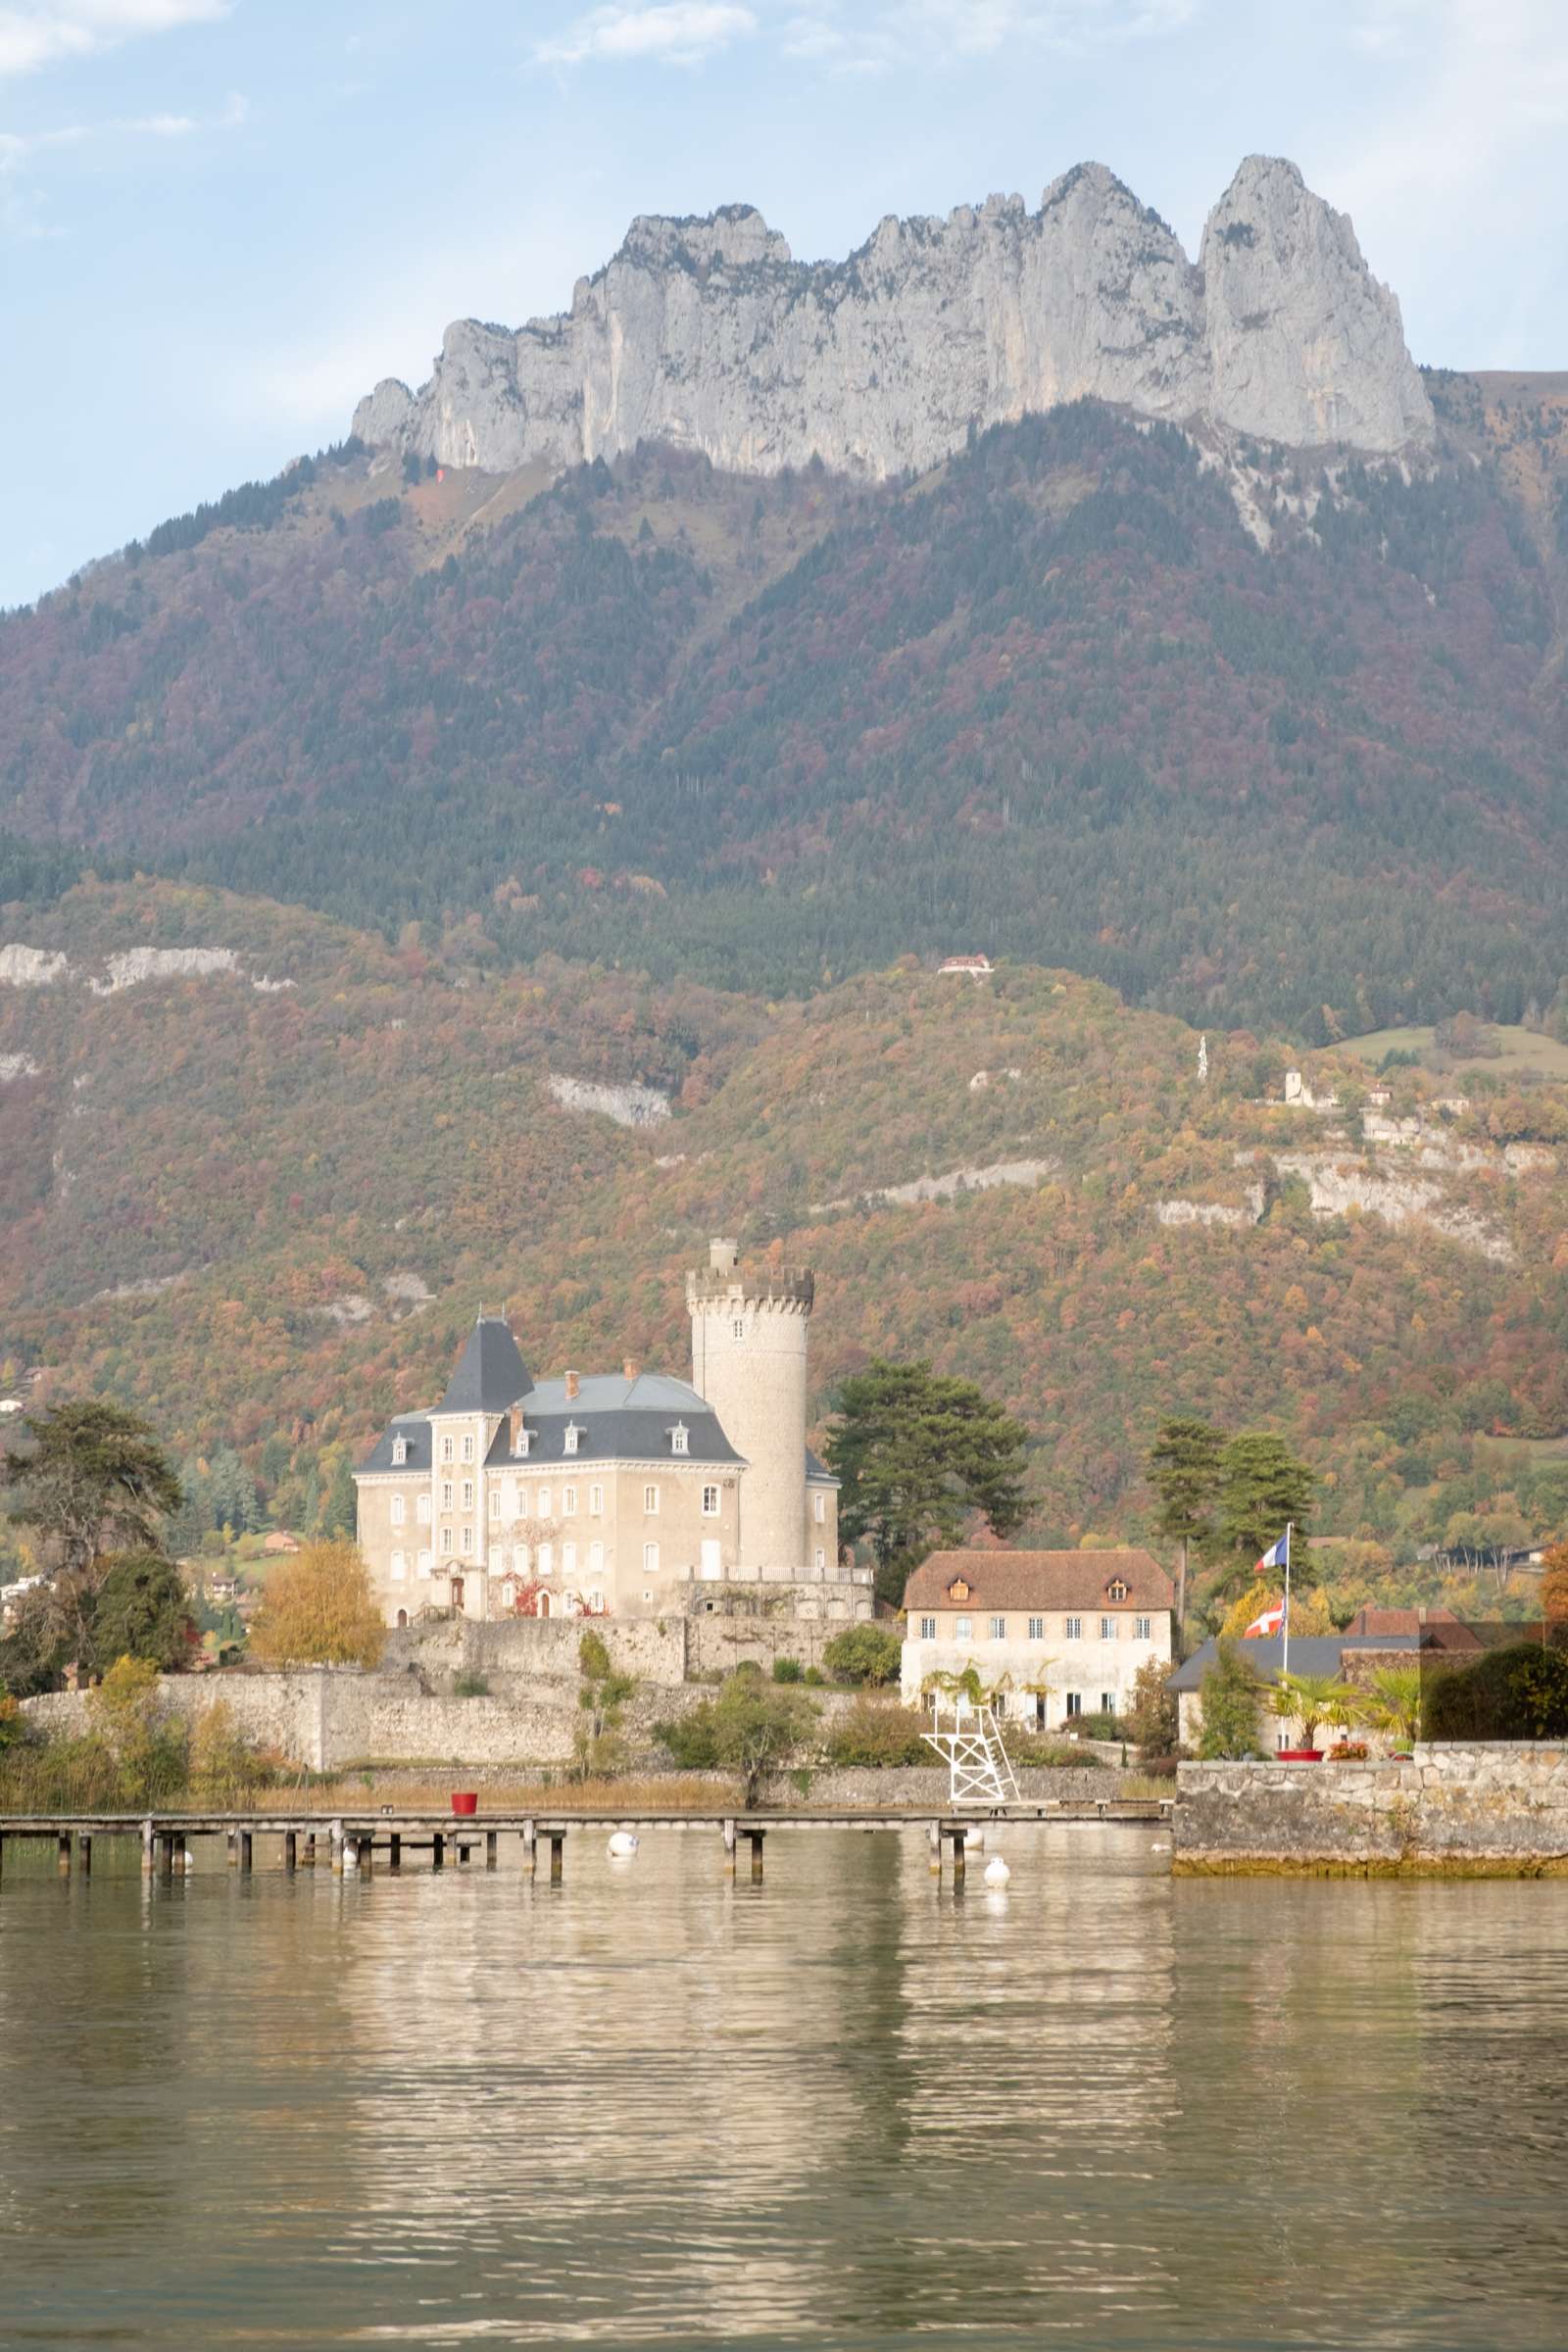 Duingt castle with mountains in background